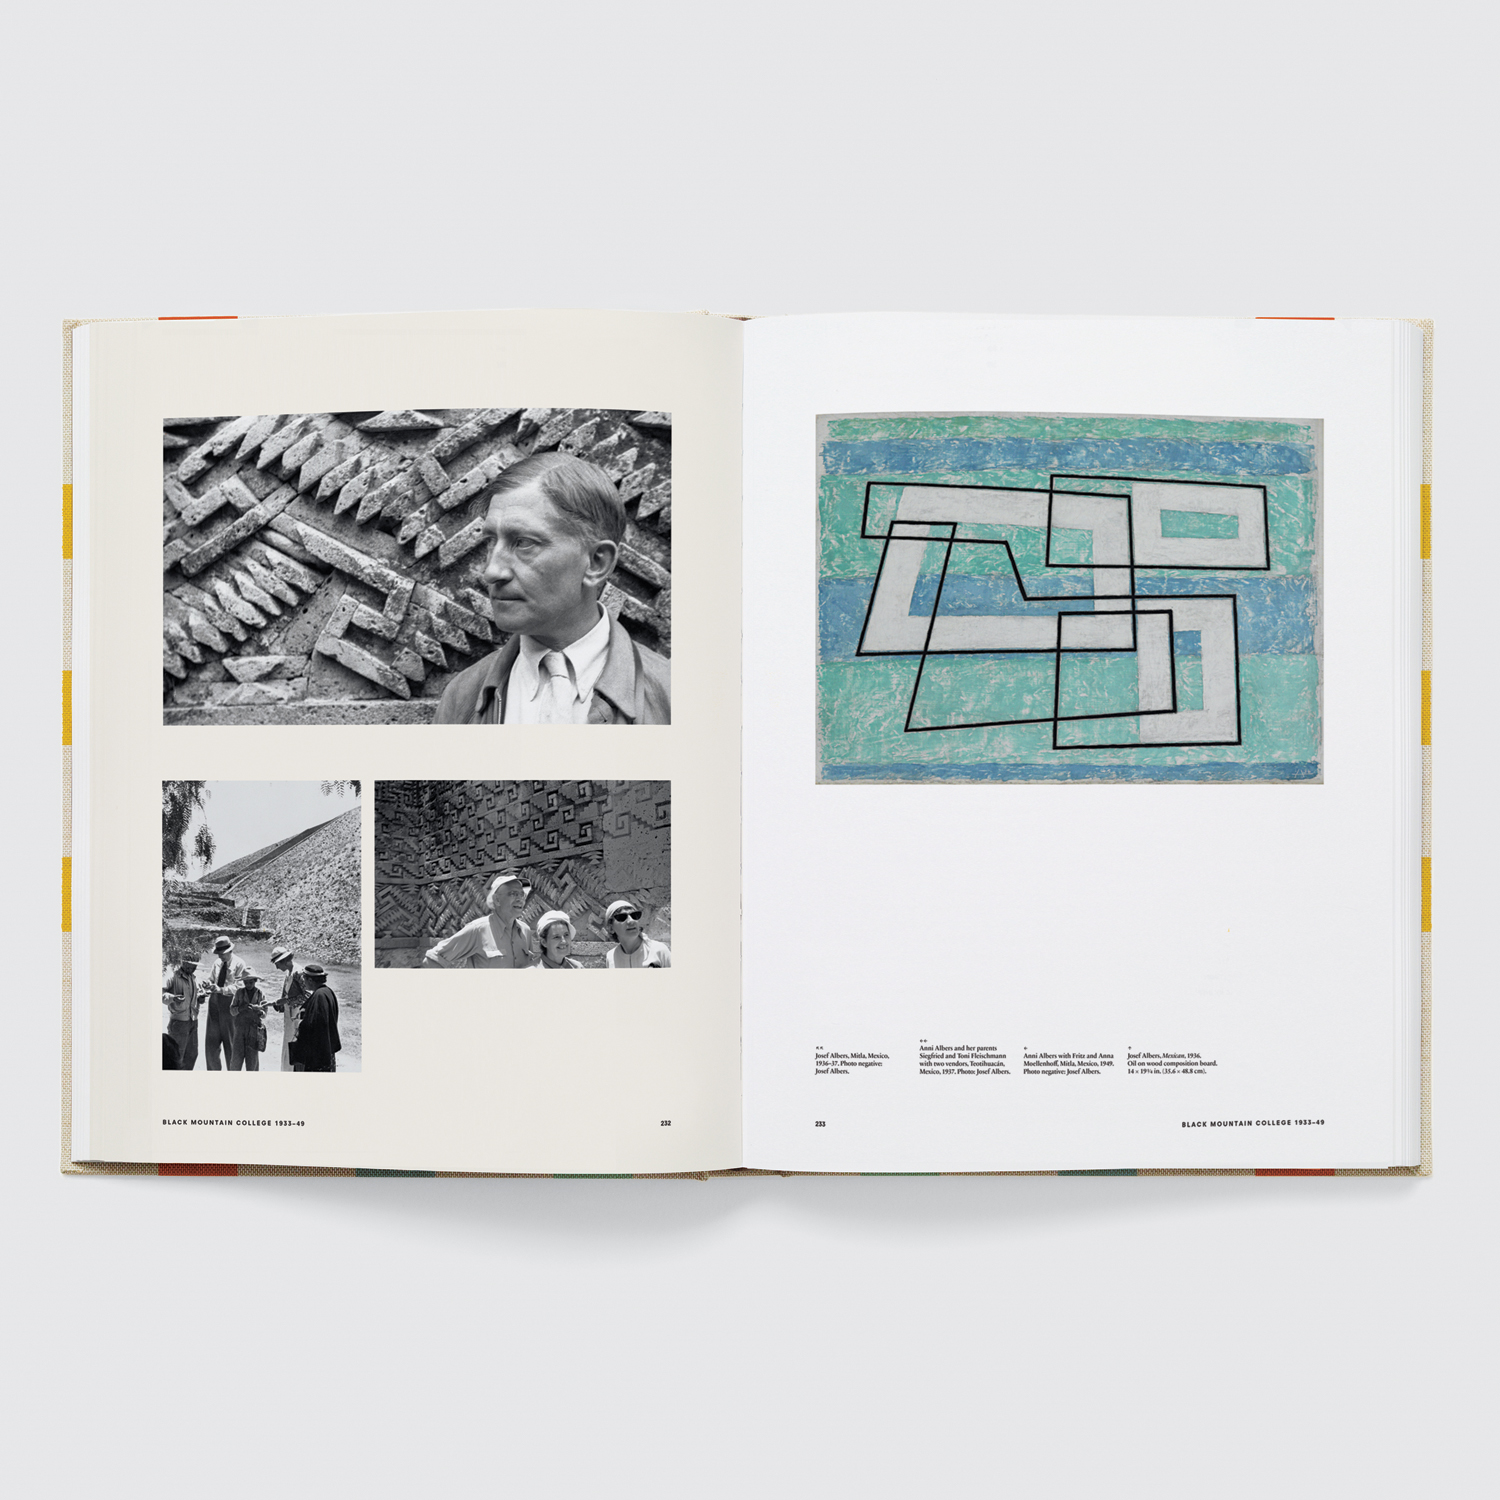 Anni & Josef Albers: Equal and Unequal by Nicholas Fox Weber, Phaidon; Josef Albers, Mitla, Mexico, 1936–37 (top left), Anni Albers and her parents Siegfried and Toni Fleischmann with two vendors, Teotihuacán, Mexico, 1937 (bottom left), Anni Albers with Fritz and Anna Moellenhoff, Mitla, Mexico, 1949 (centre left), Josef Albers, Mexican, 1936 (right), pages 232-233